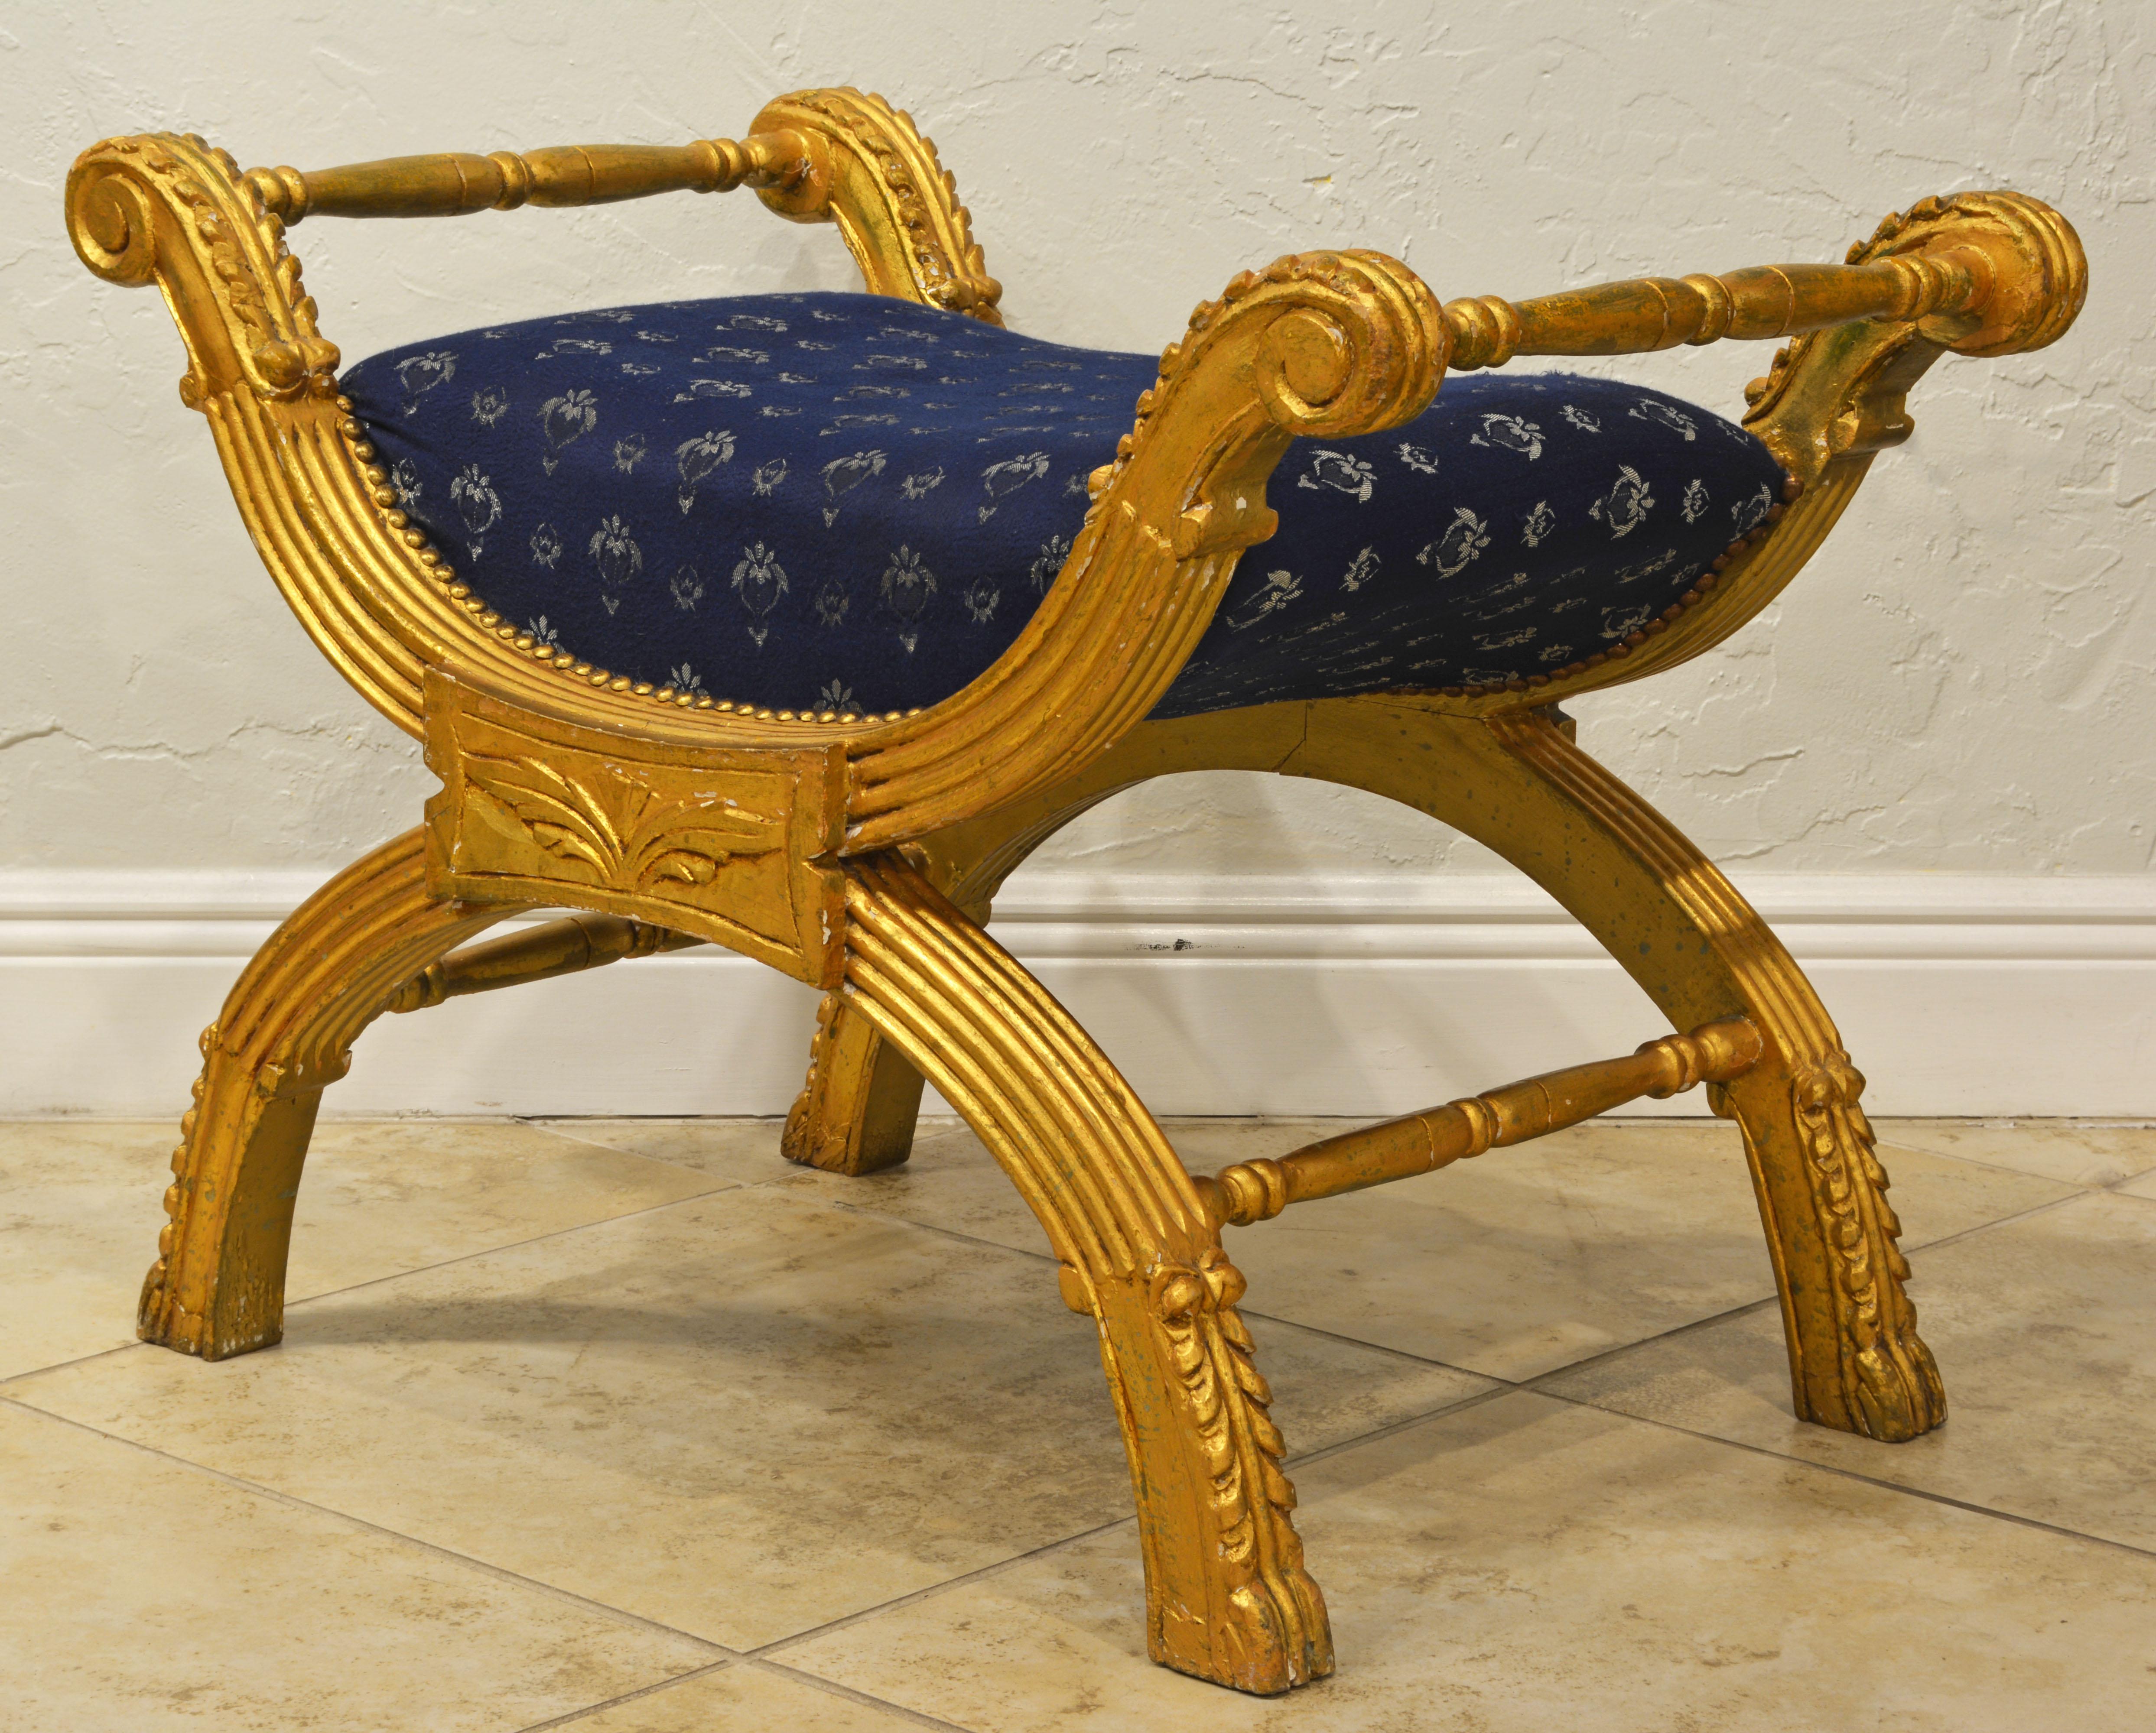 Carved in the classical fashion this Italian giltwood Curule style bench is upholstered and covered with a tasteful fabric. It likely dates to the late 20th century.